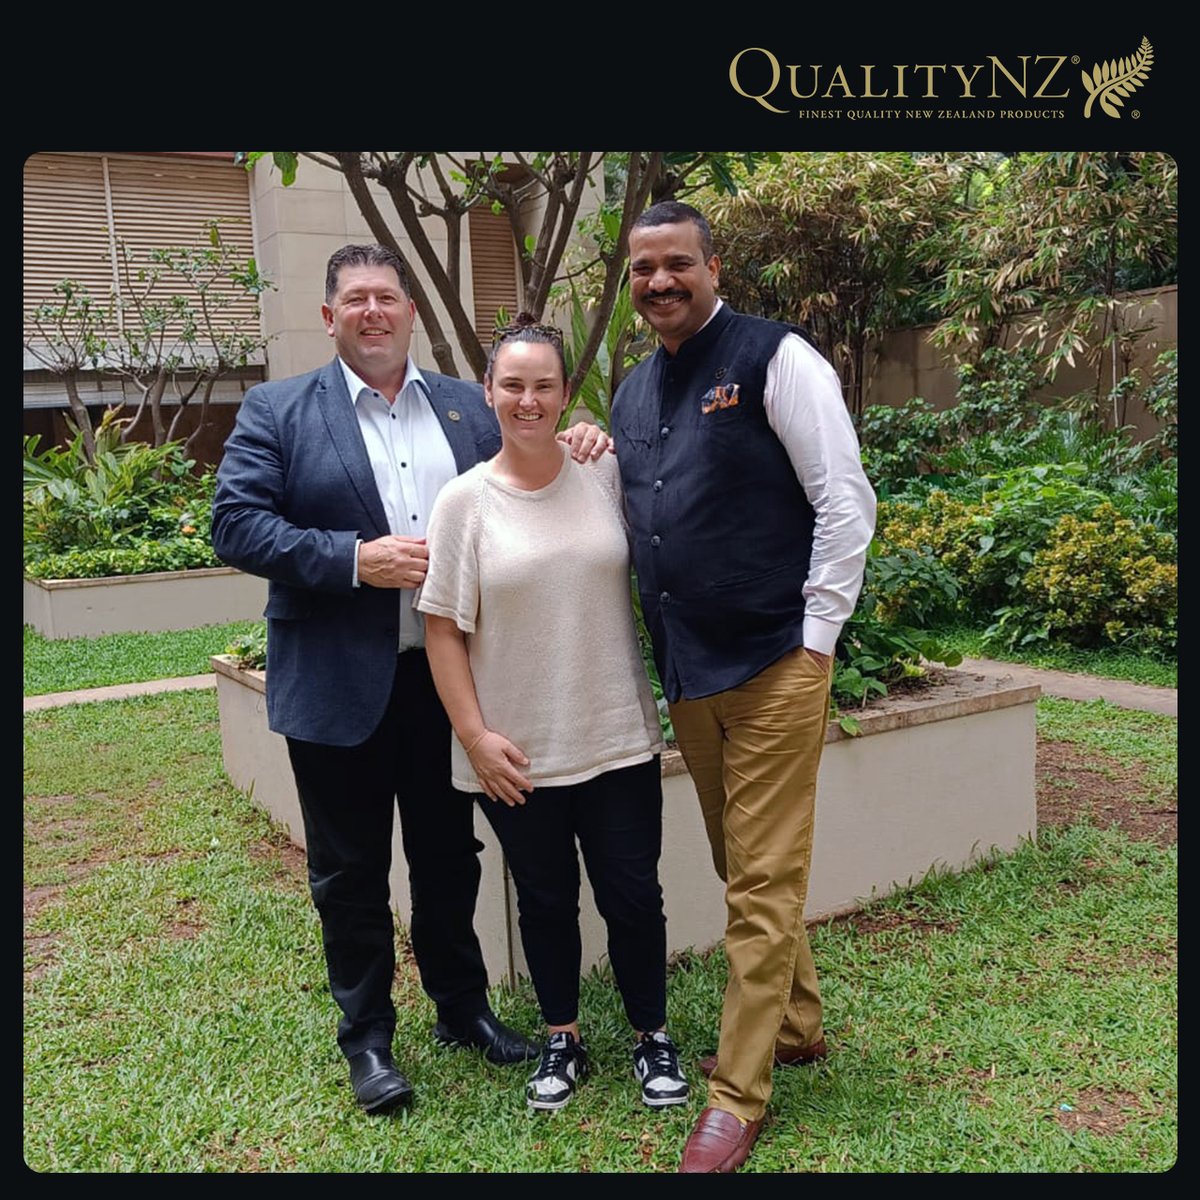 It was an absolute pleasure to meet the extremely talented @kateymartin15, former New Zealand cricketer and renowned commentator. Your passion and energy are truly inspiring! 
.
.
.
#kateymartin #cricketer #newzealand #newzealandcricket #QualityNZ #TastyKiwi #meat #premiumquality